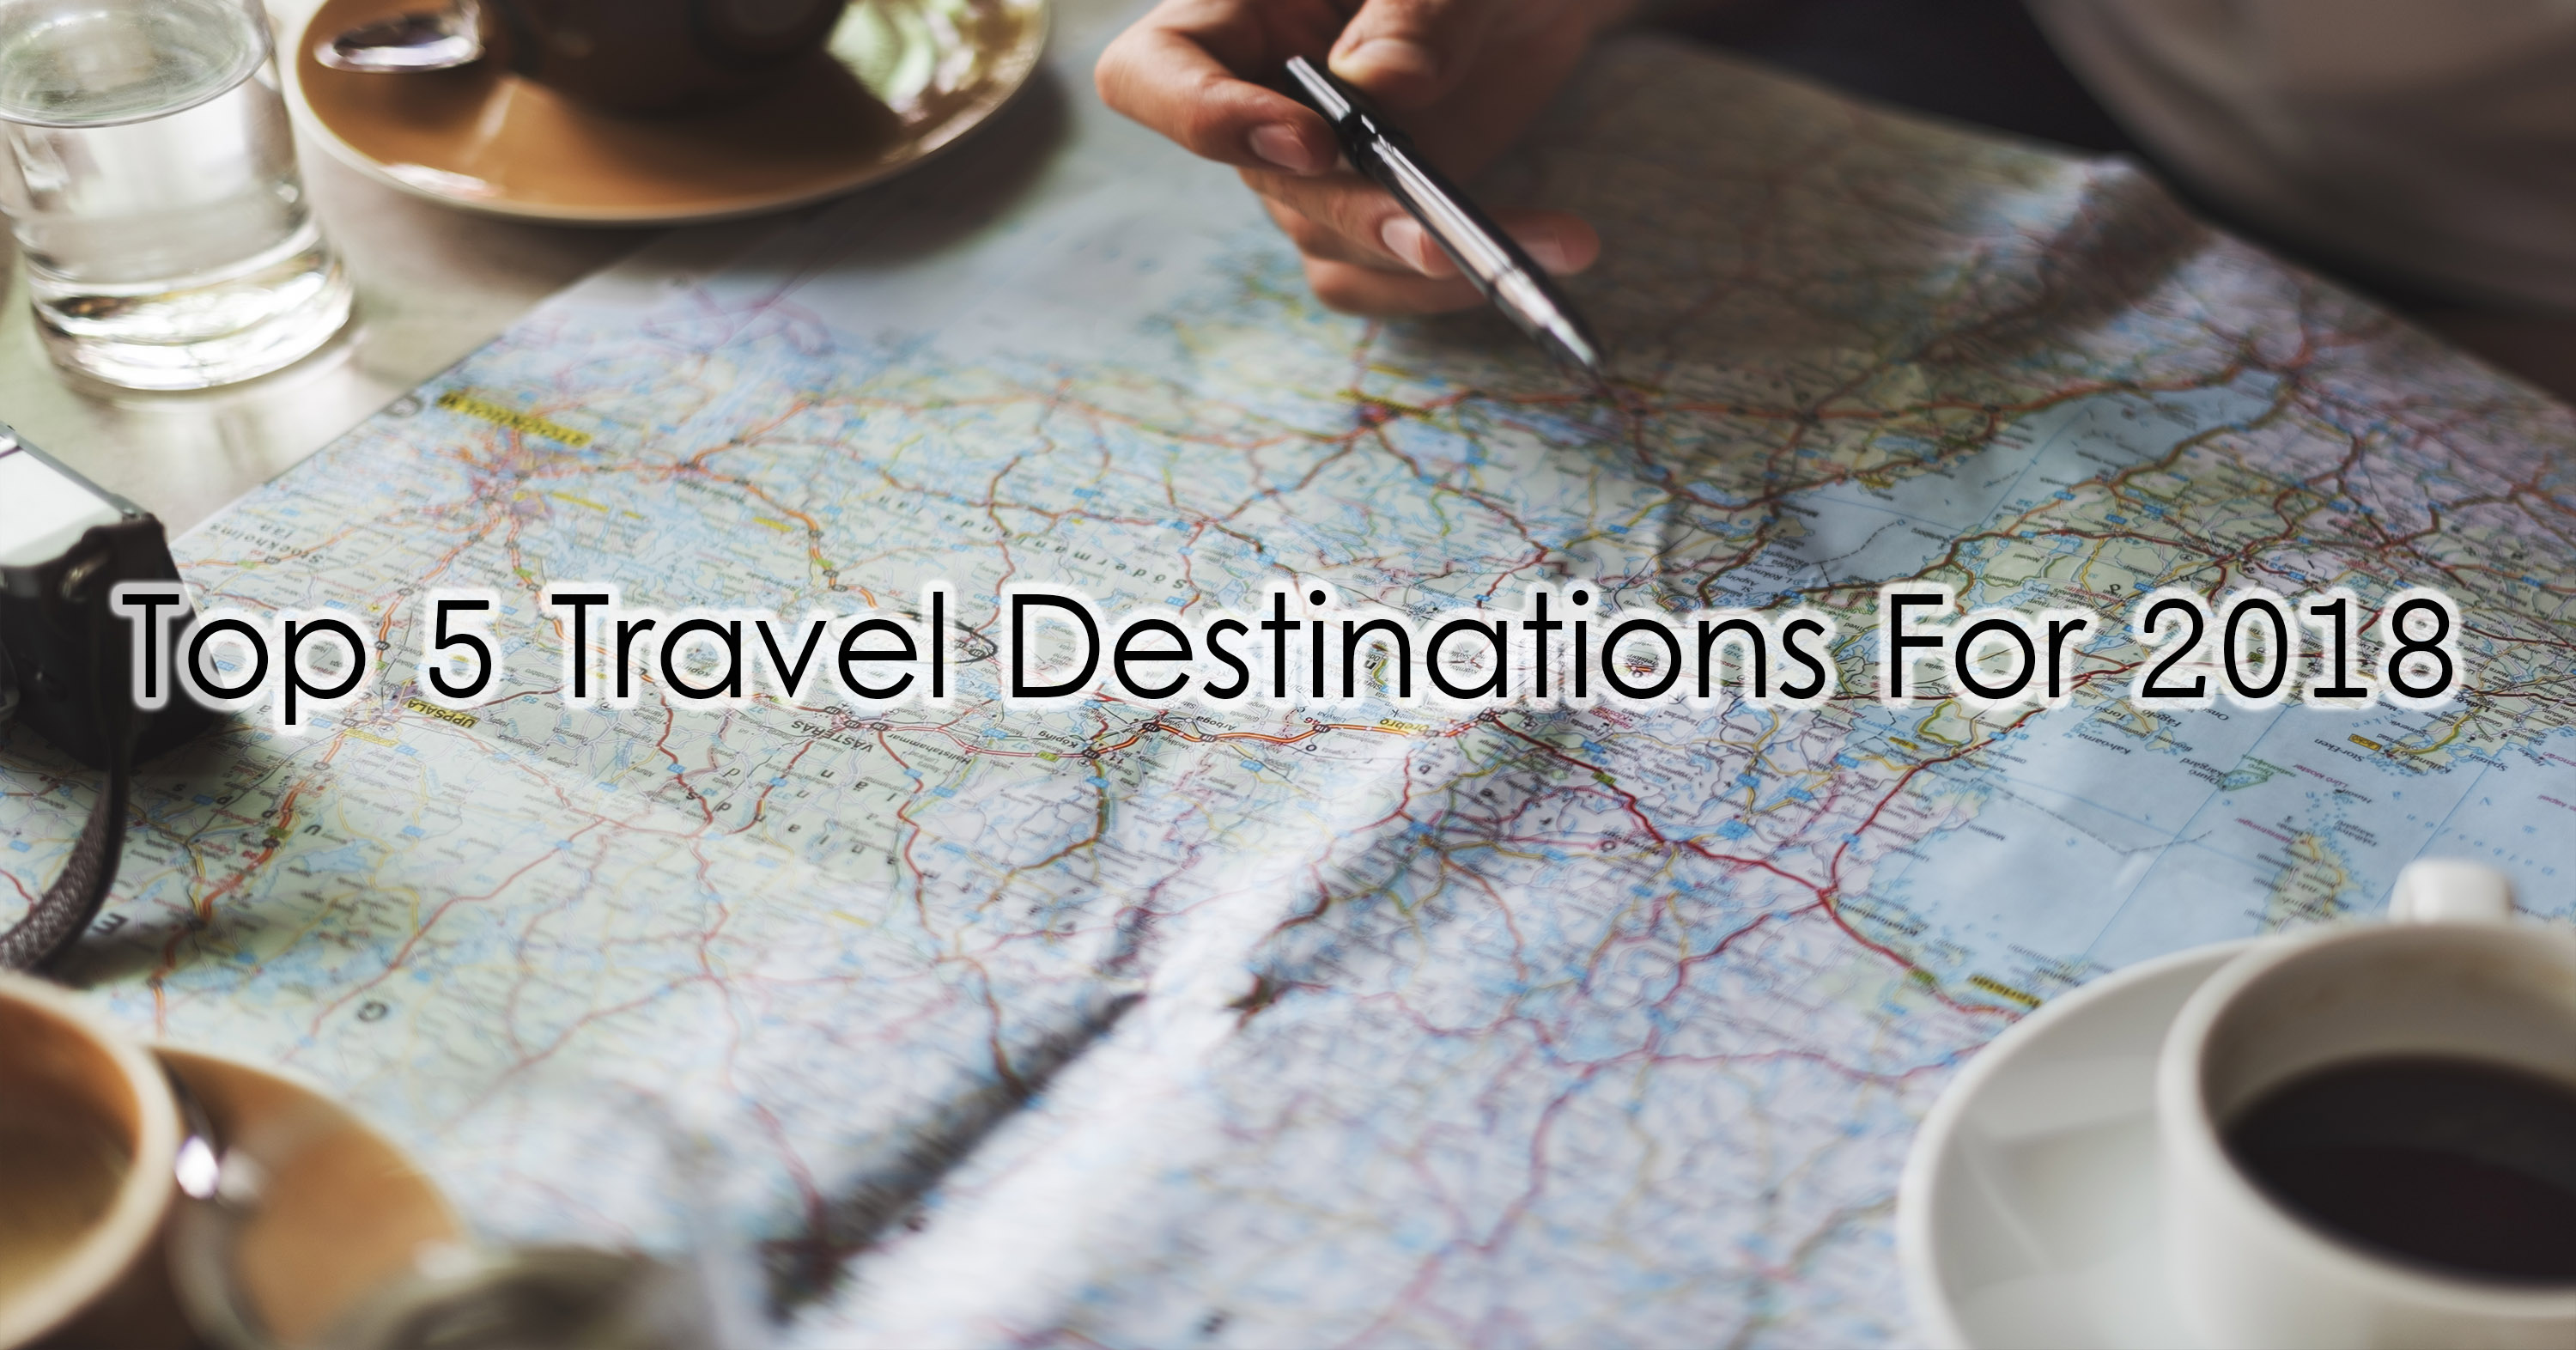 Top 5 Travel Destinations For 2018